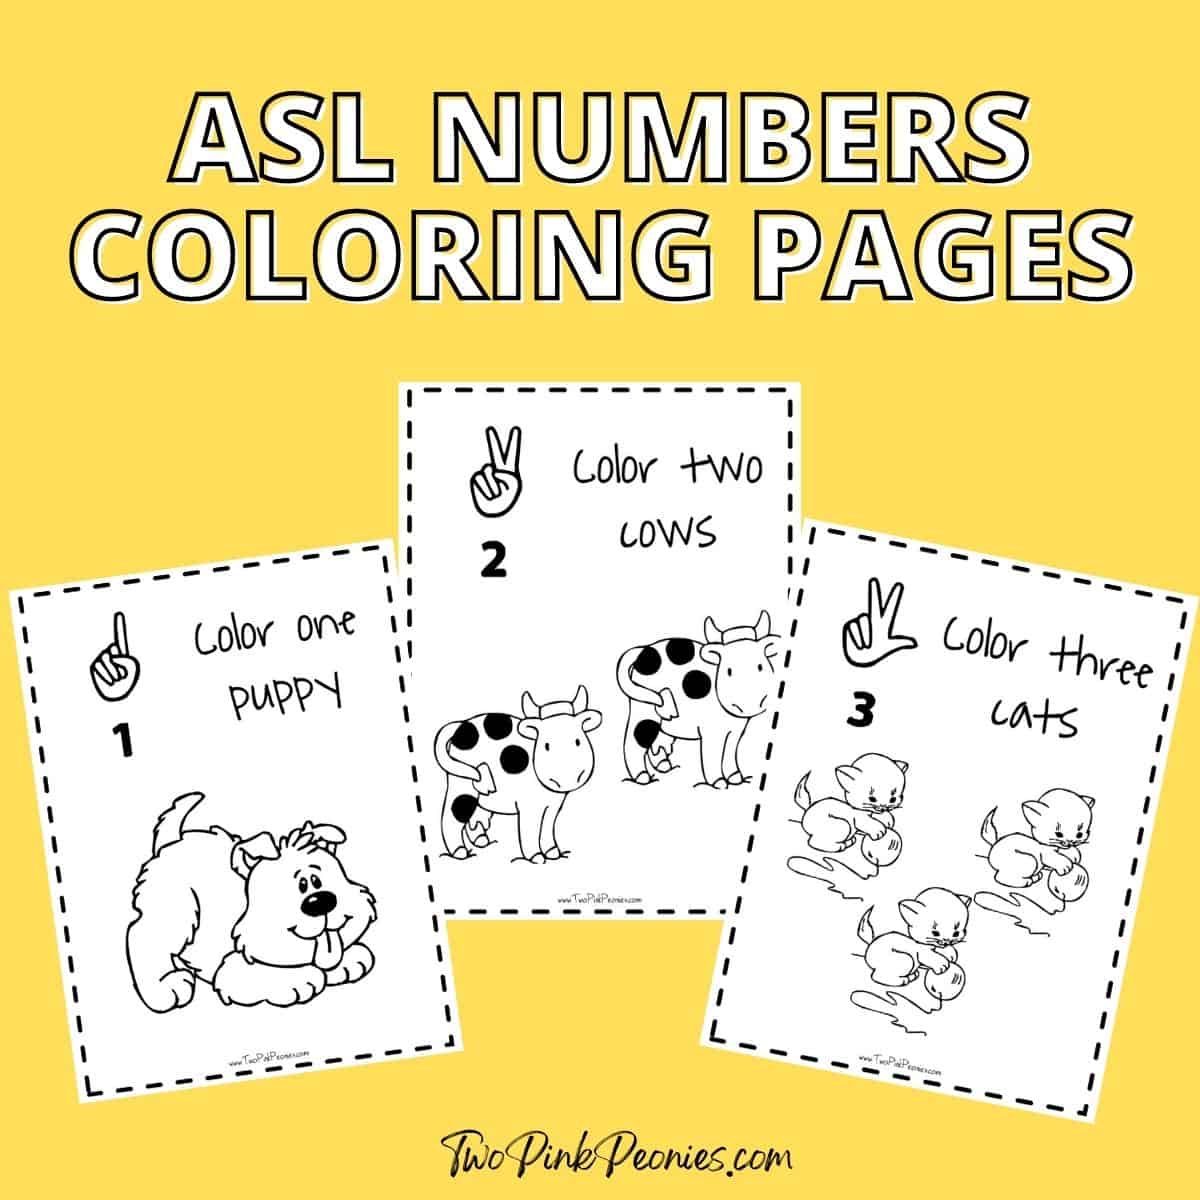 text that says ASL numbers coloring pages below the text are mock ups of the 1, 2, and 3 coloring pages